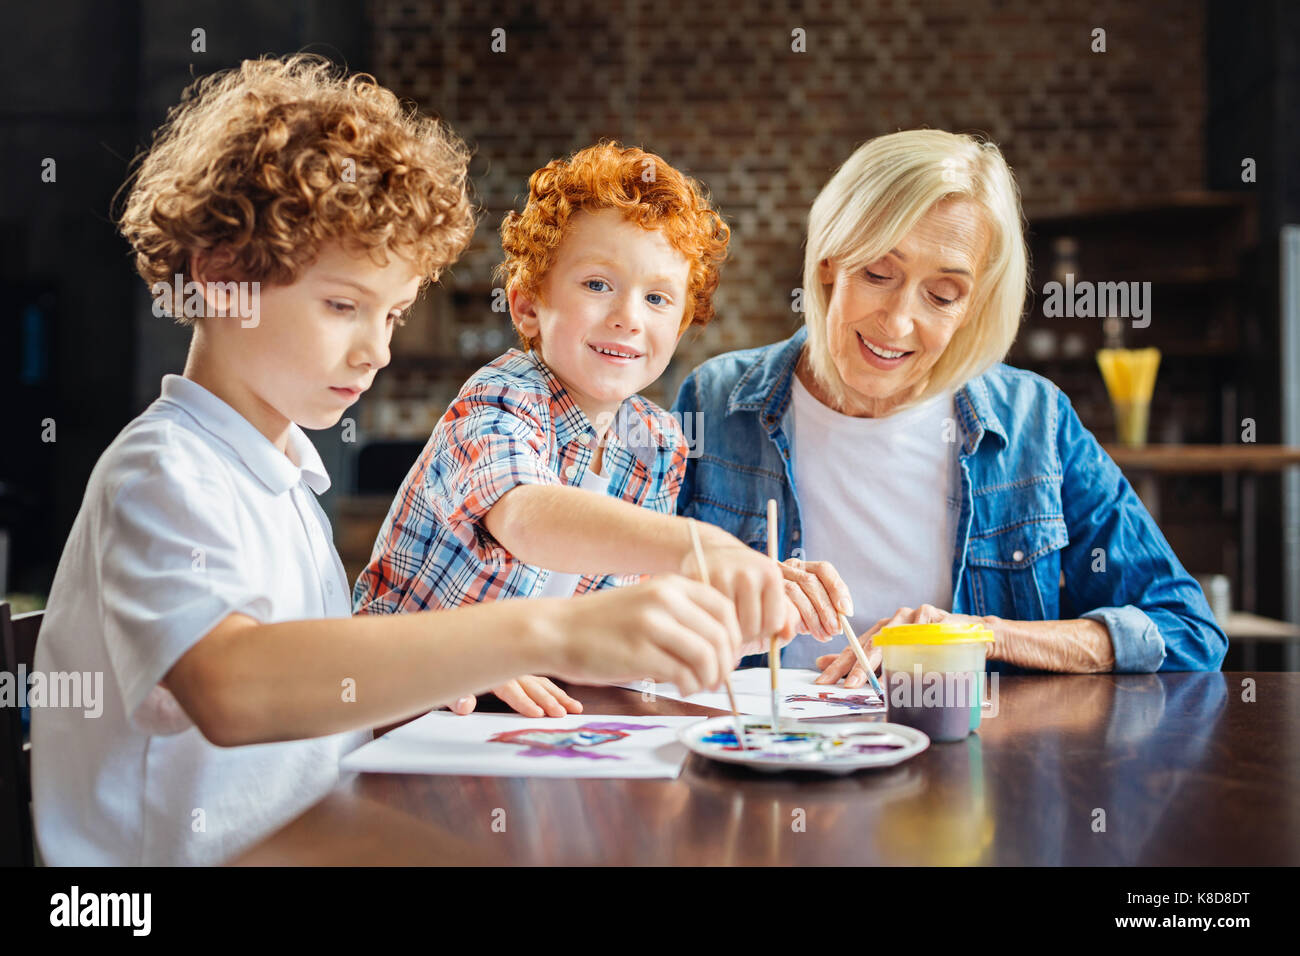 Cute ginger haired boy enjoying painting with brother and granny Stock Photo